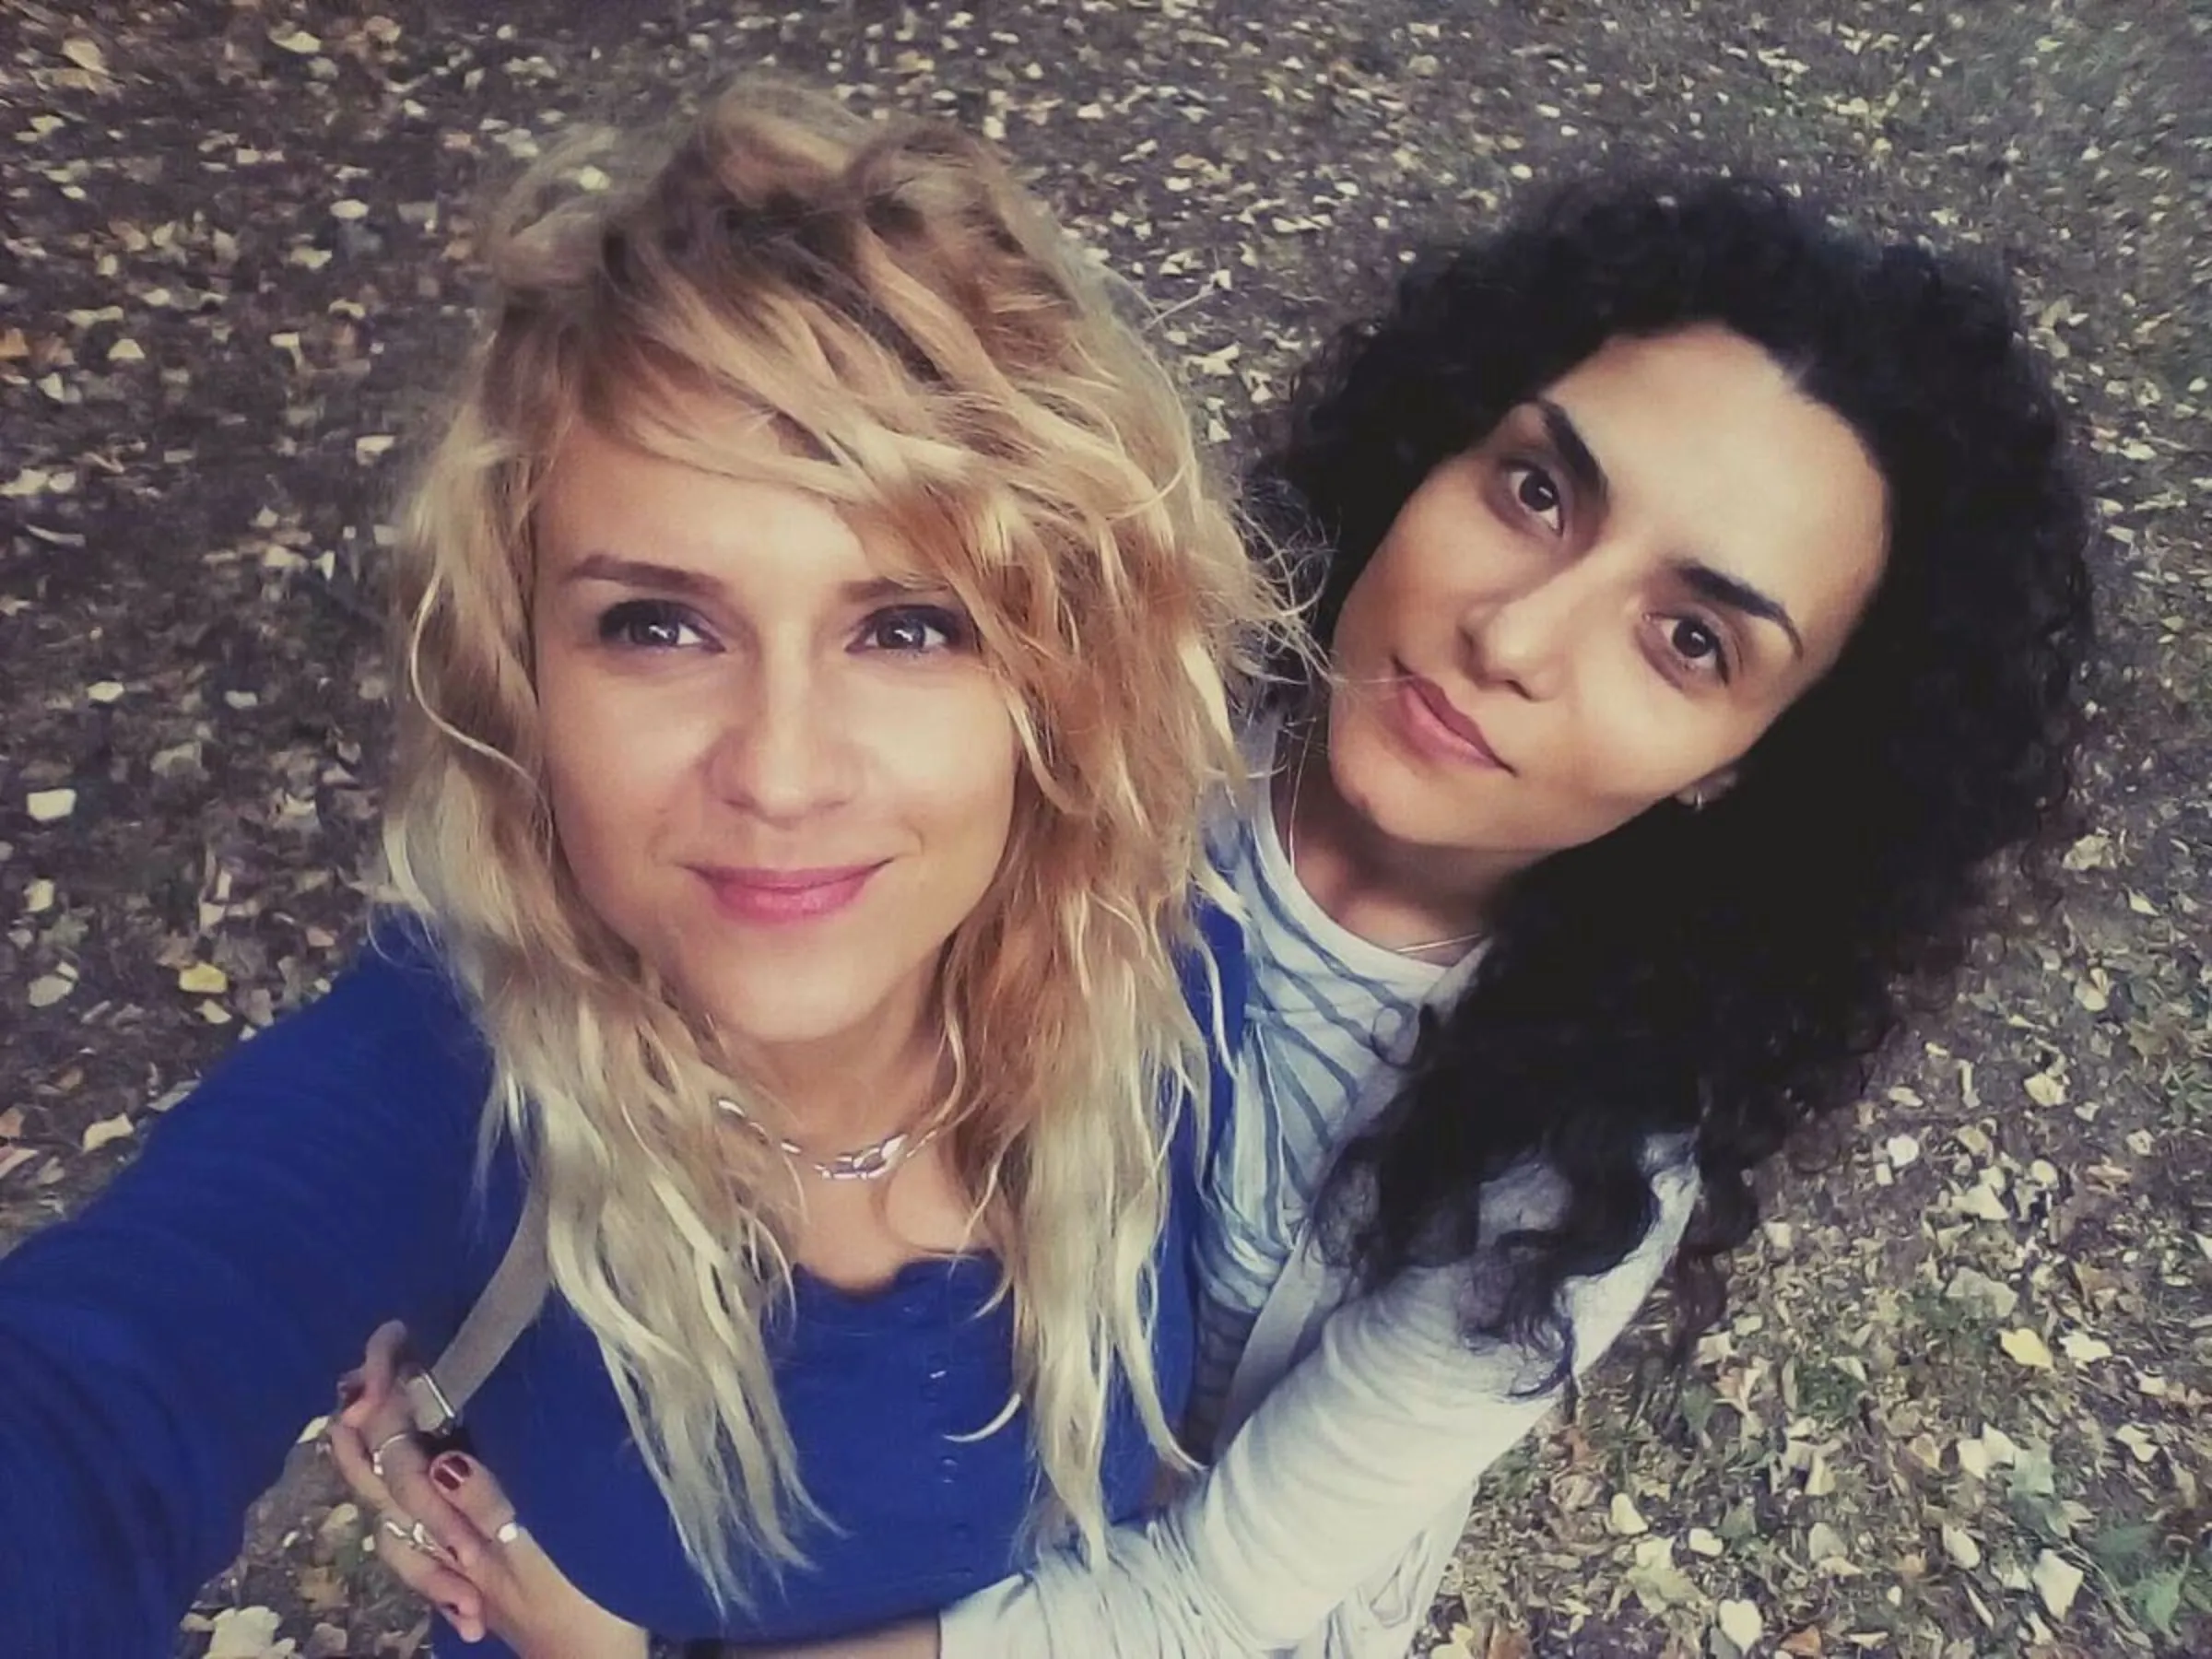 Radica Stevanov (L) and Stefana Budimirovic (R) pose for a photo together in the woods of Fruska Gora, Serbia in this undated handout photo. Stefana Budimirovic/Handout via Thomson Reuters Foundation